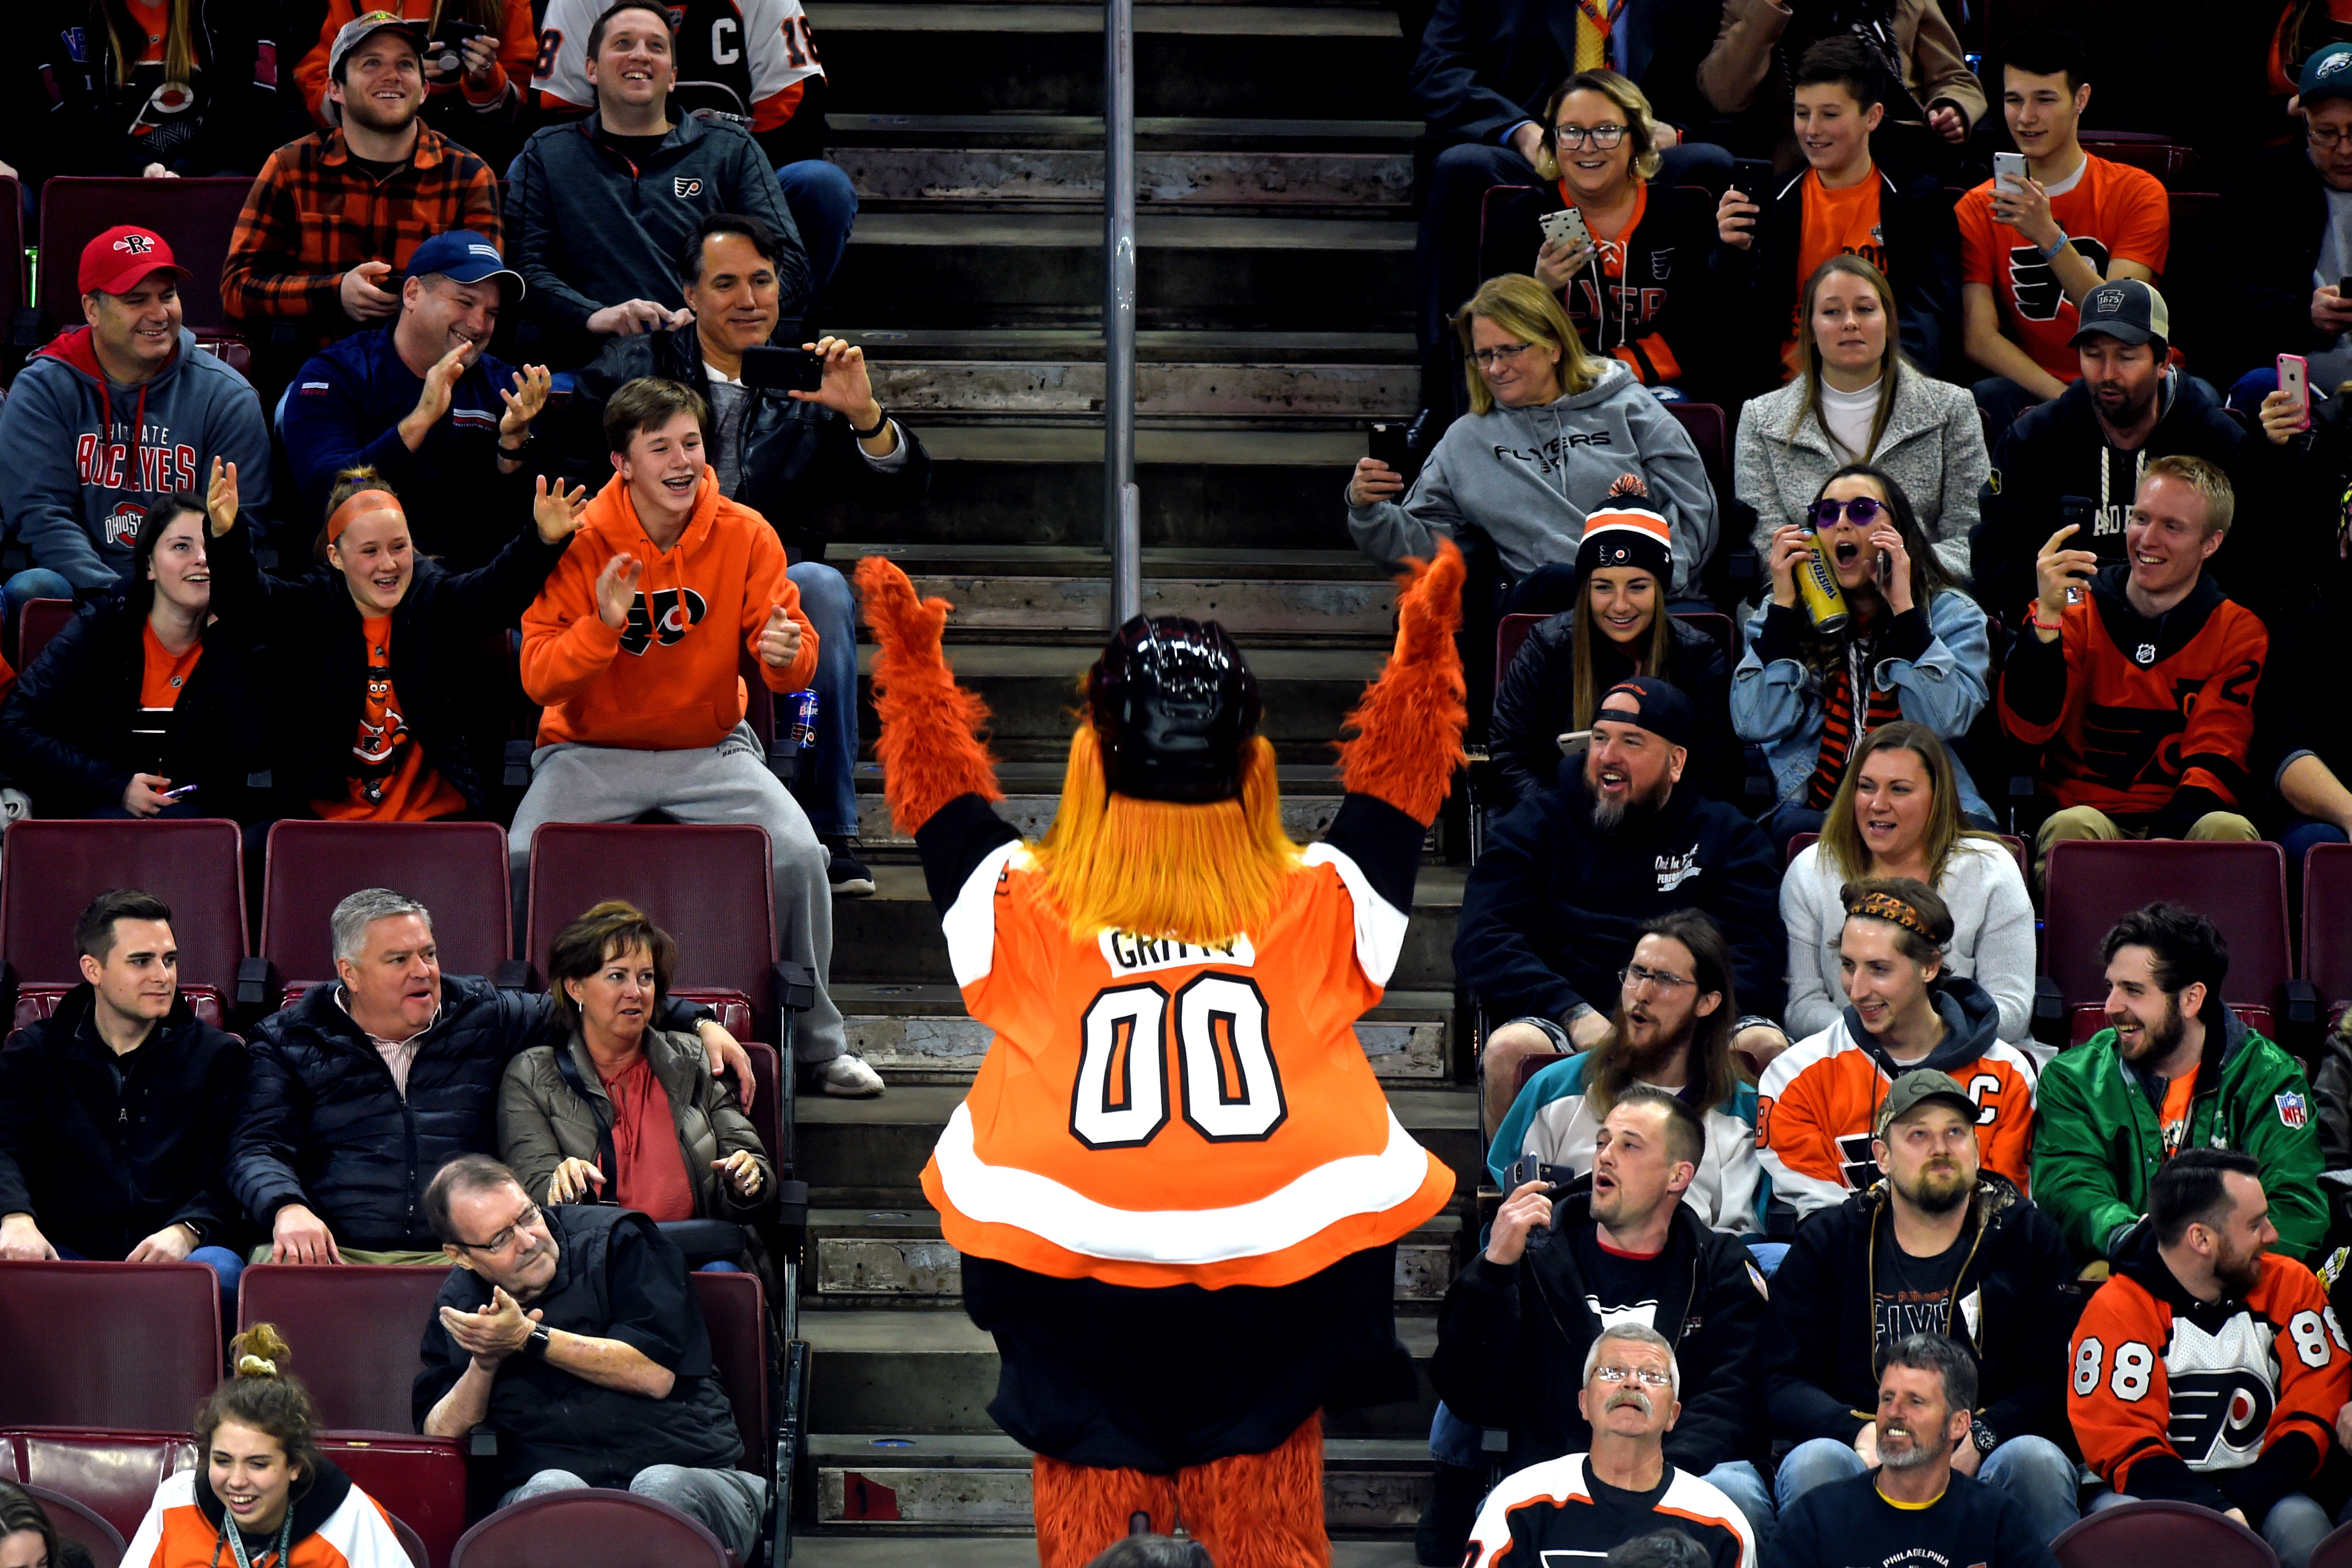 While attendance is scarce at Flyers games, Flyers Fans continue